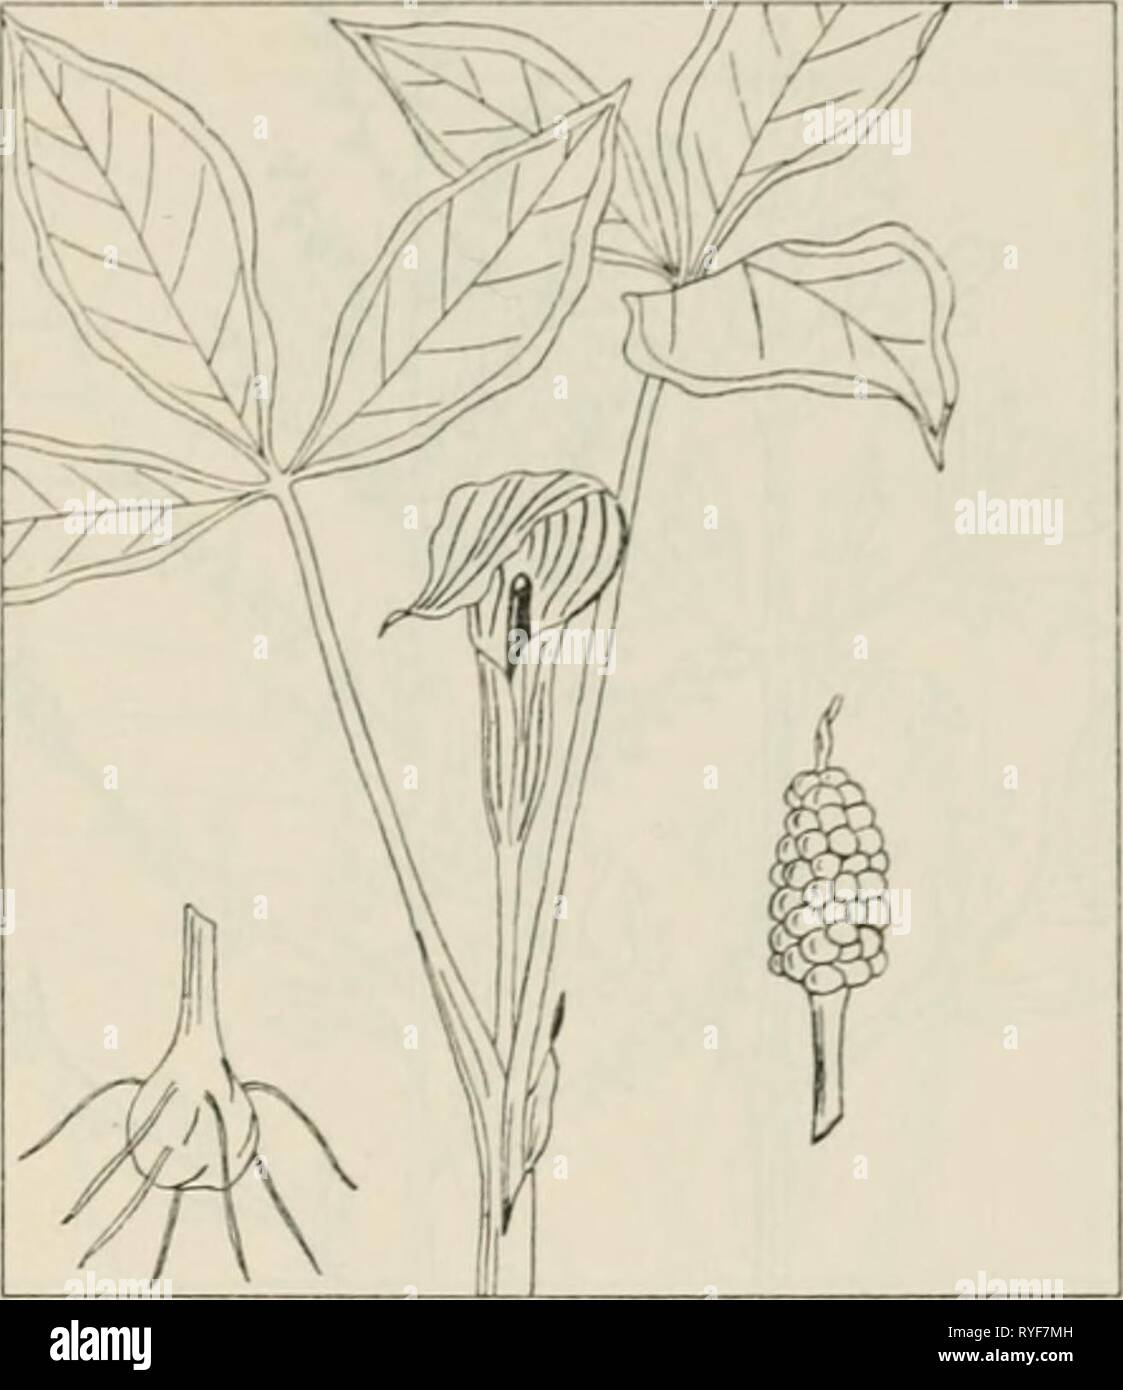 The drug plants of Illinois  drugplantsofilli44teho Year: 1951  Tehon THE DRUG PLANTS OF ILLINOIS 25 ARISAEMA TRIPHYLLUM (L.) Schott. Indian turnip, Jack-in-the-pul- pit. Araceae.—An herb 8 inches to 3 feet tall, perennial; corm turnip-shaped, wrinkled, intensely acrid; leaves mostly 2, compound; leaflets 3, veiny, elliptical ovate; petioles tall, sheathing the flower stalk; flowers minute, crowded at the base of a club-shaped spadix, the latter inclosed by a hoodlike and tubular, variegated, more or less colored spathe; fruit a scarlet, 1- to 5-seeded berry. The corm collected in summer or au Stock Photo